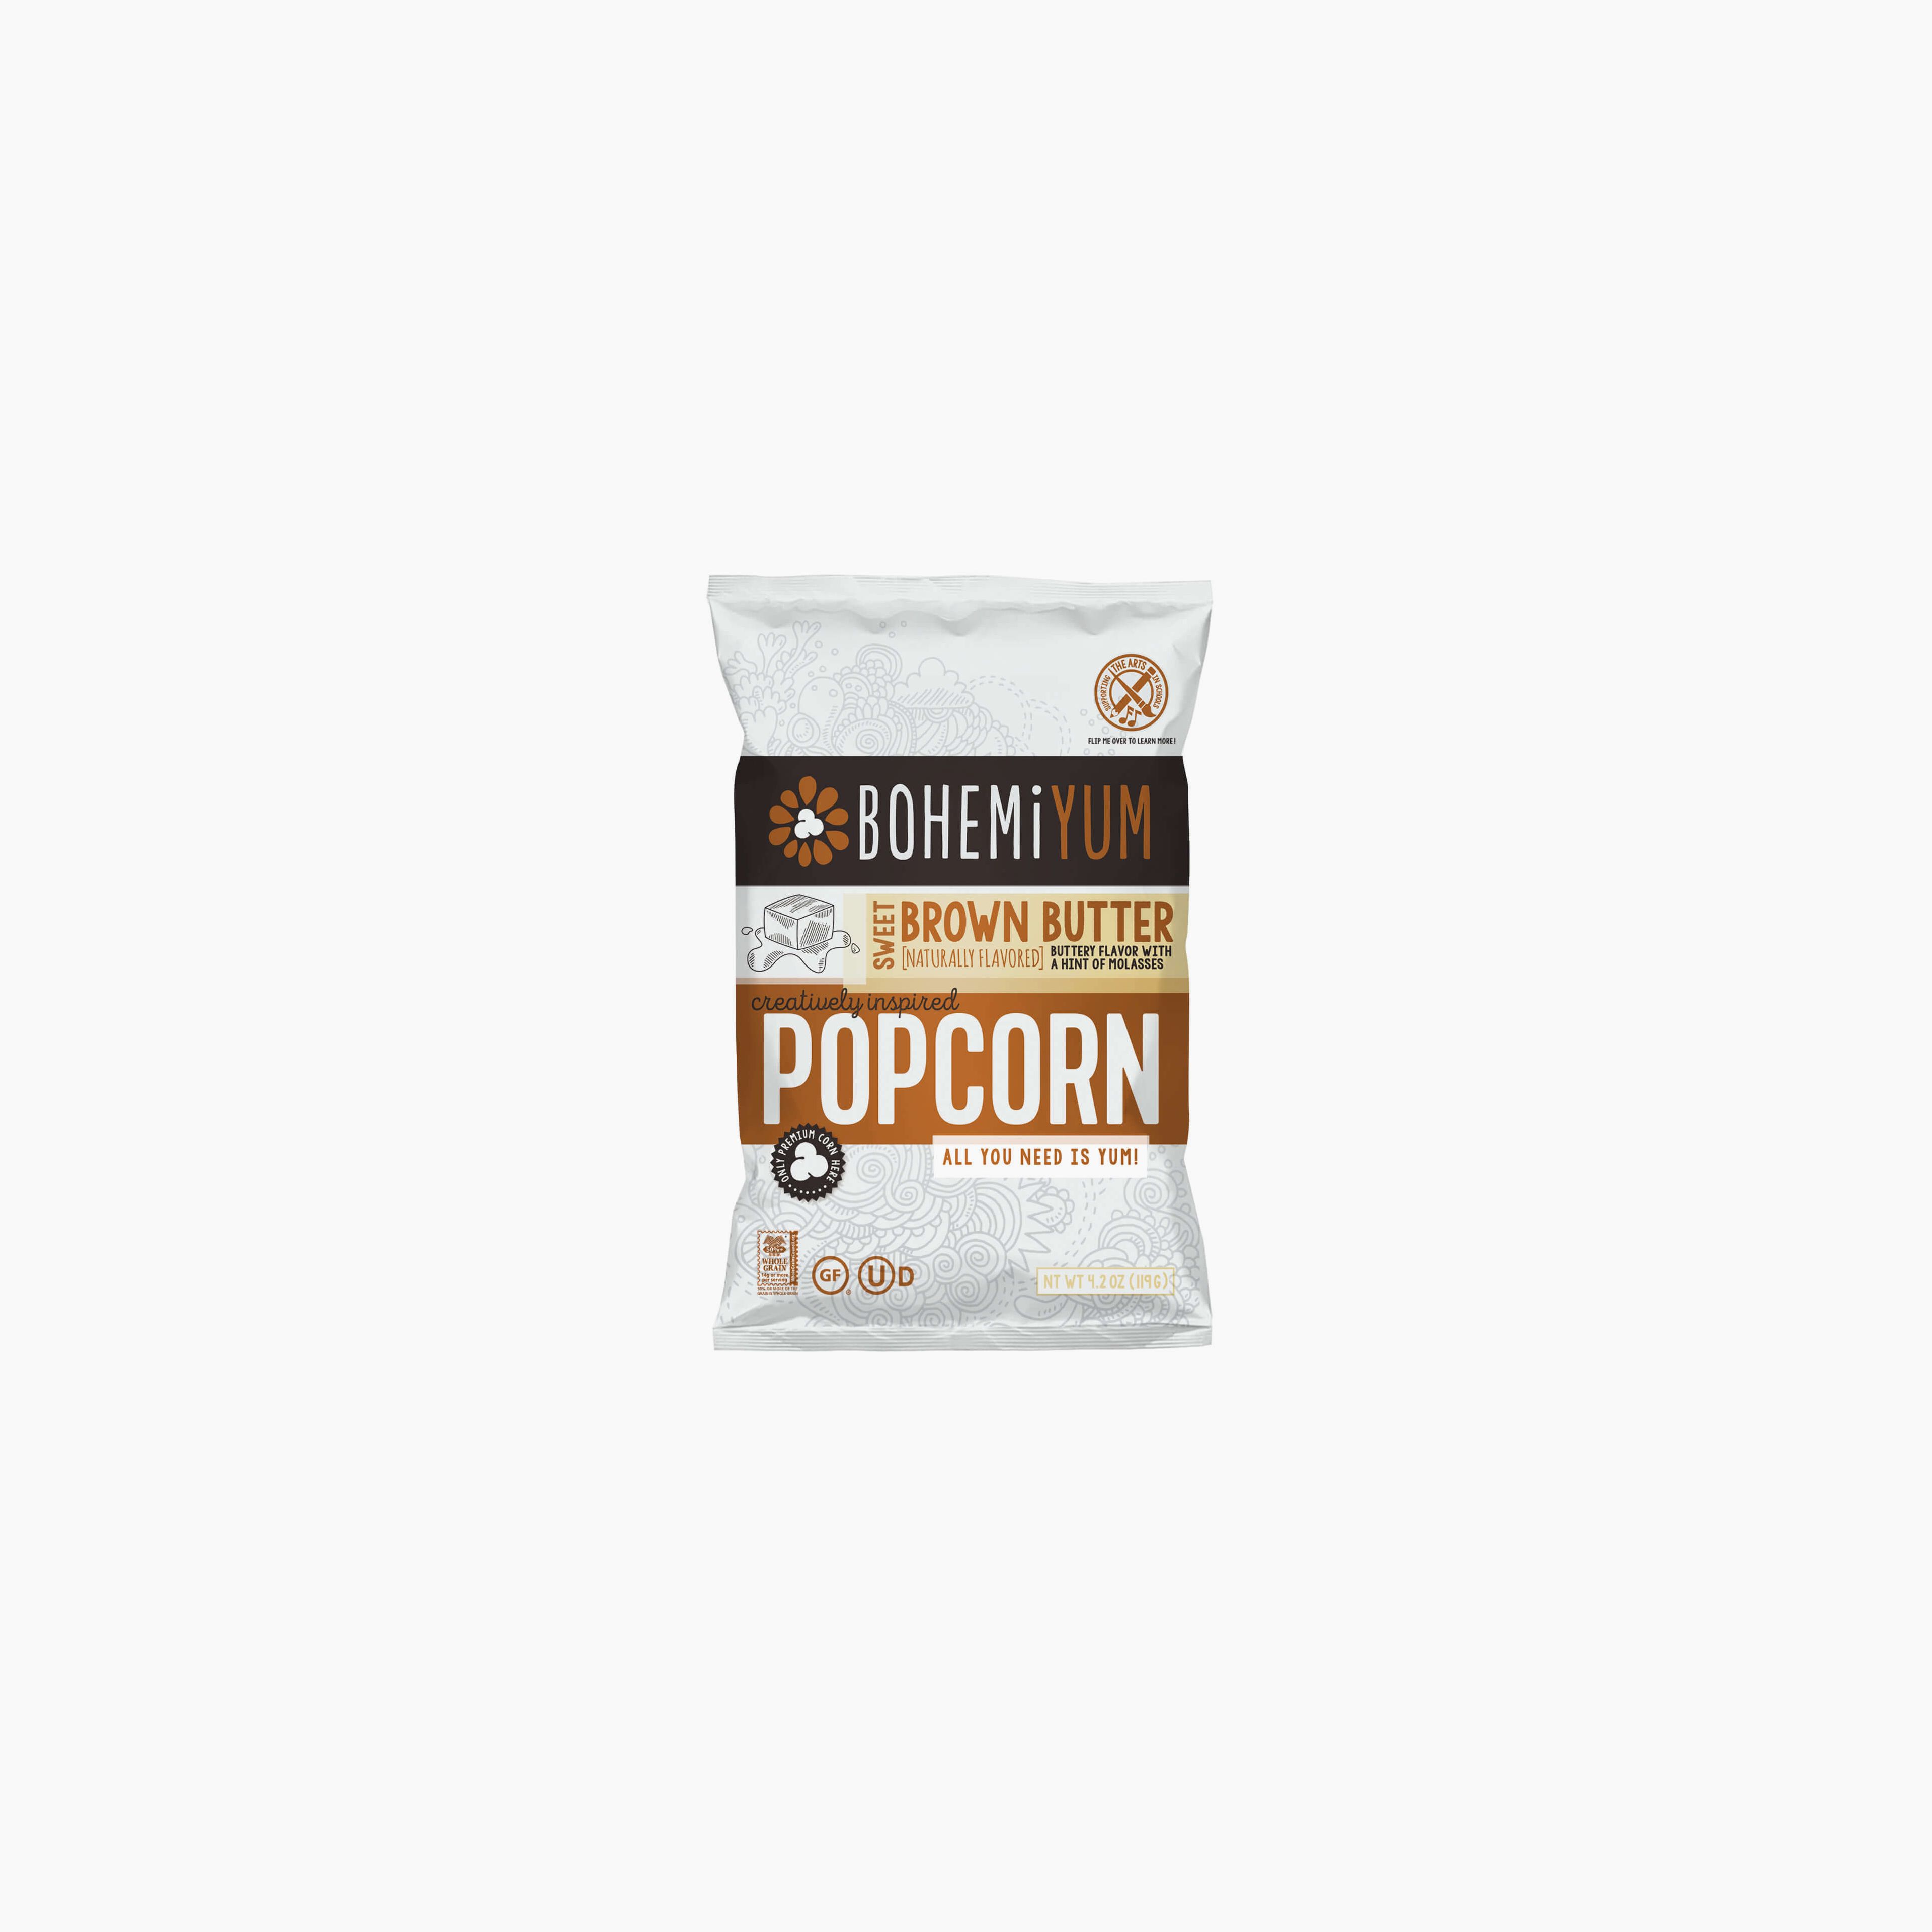 Sweet Brown Butter Popcorn Pack